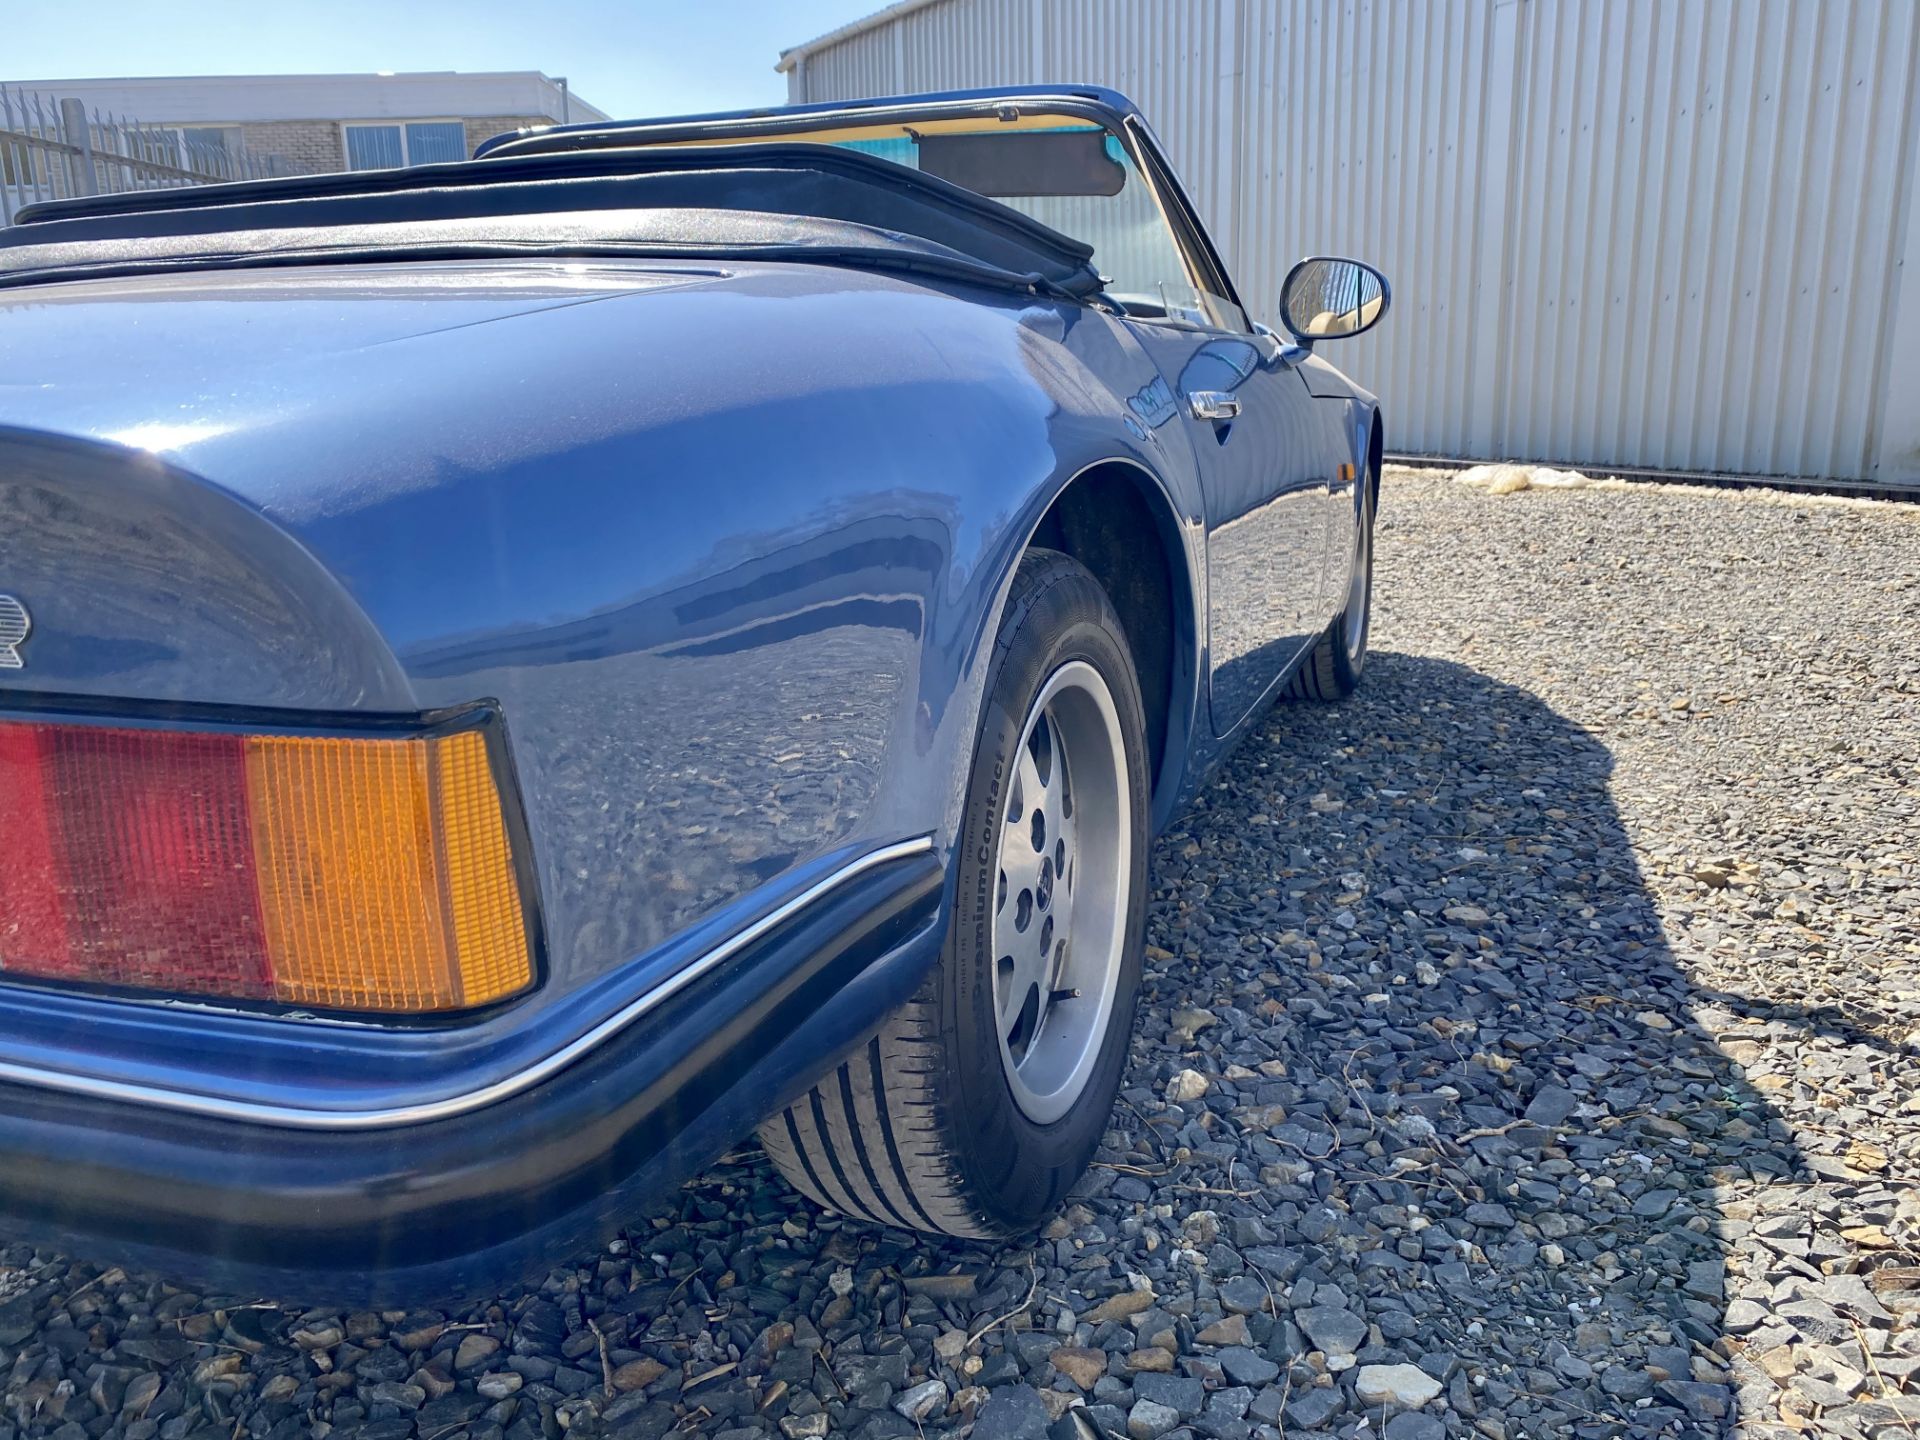 TVR S2 - Image 26 of 60